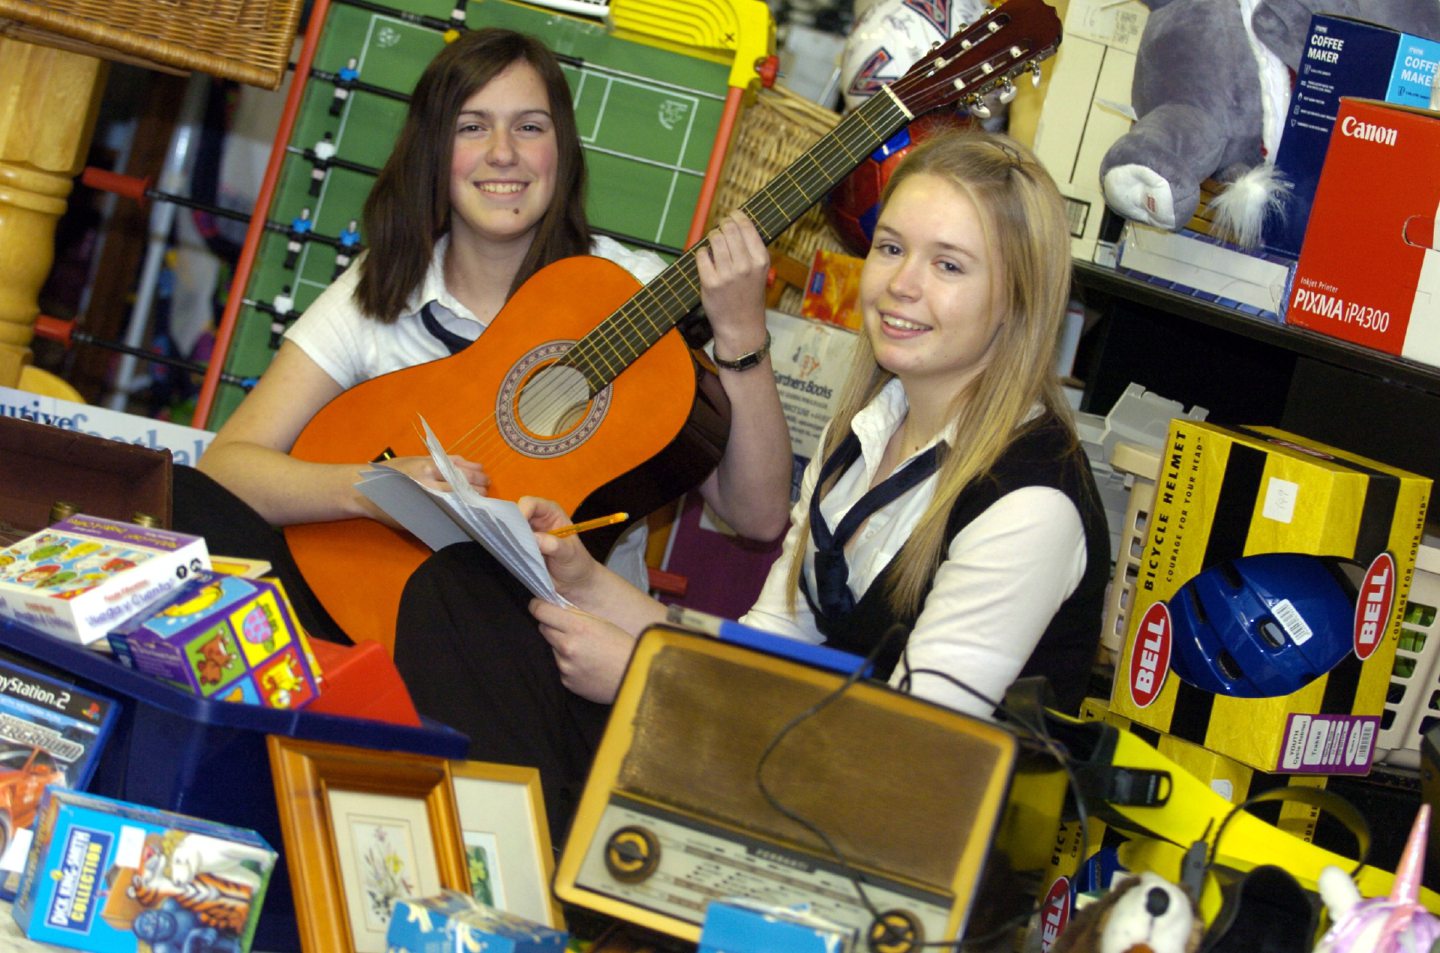 Inverurie Academy pupils posing with items set for auction for charity